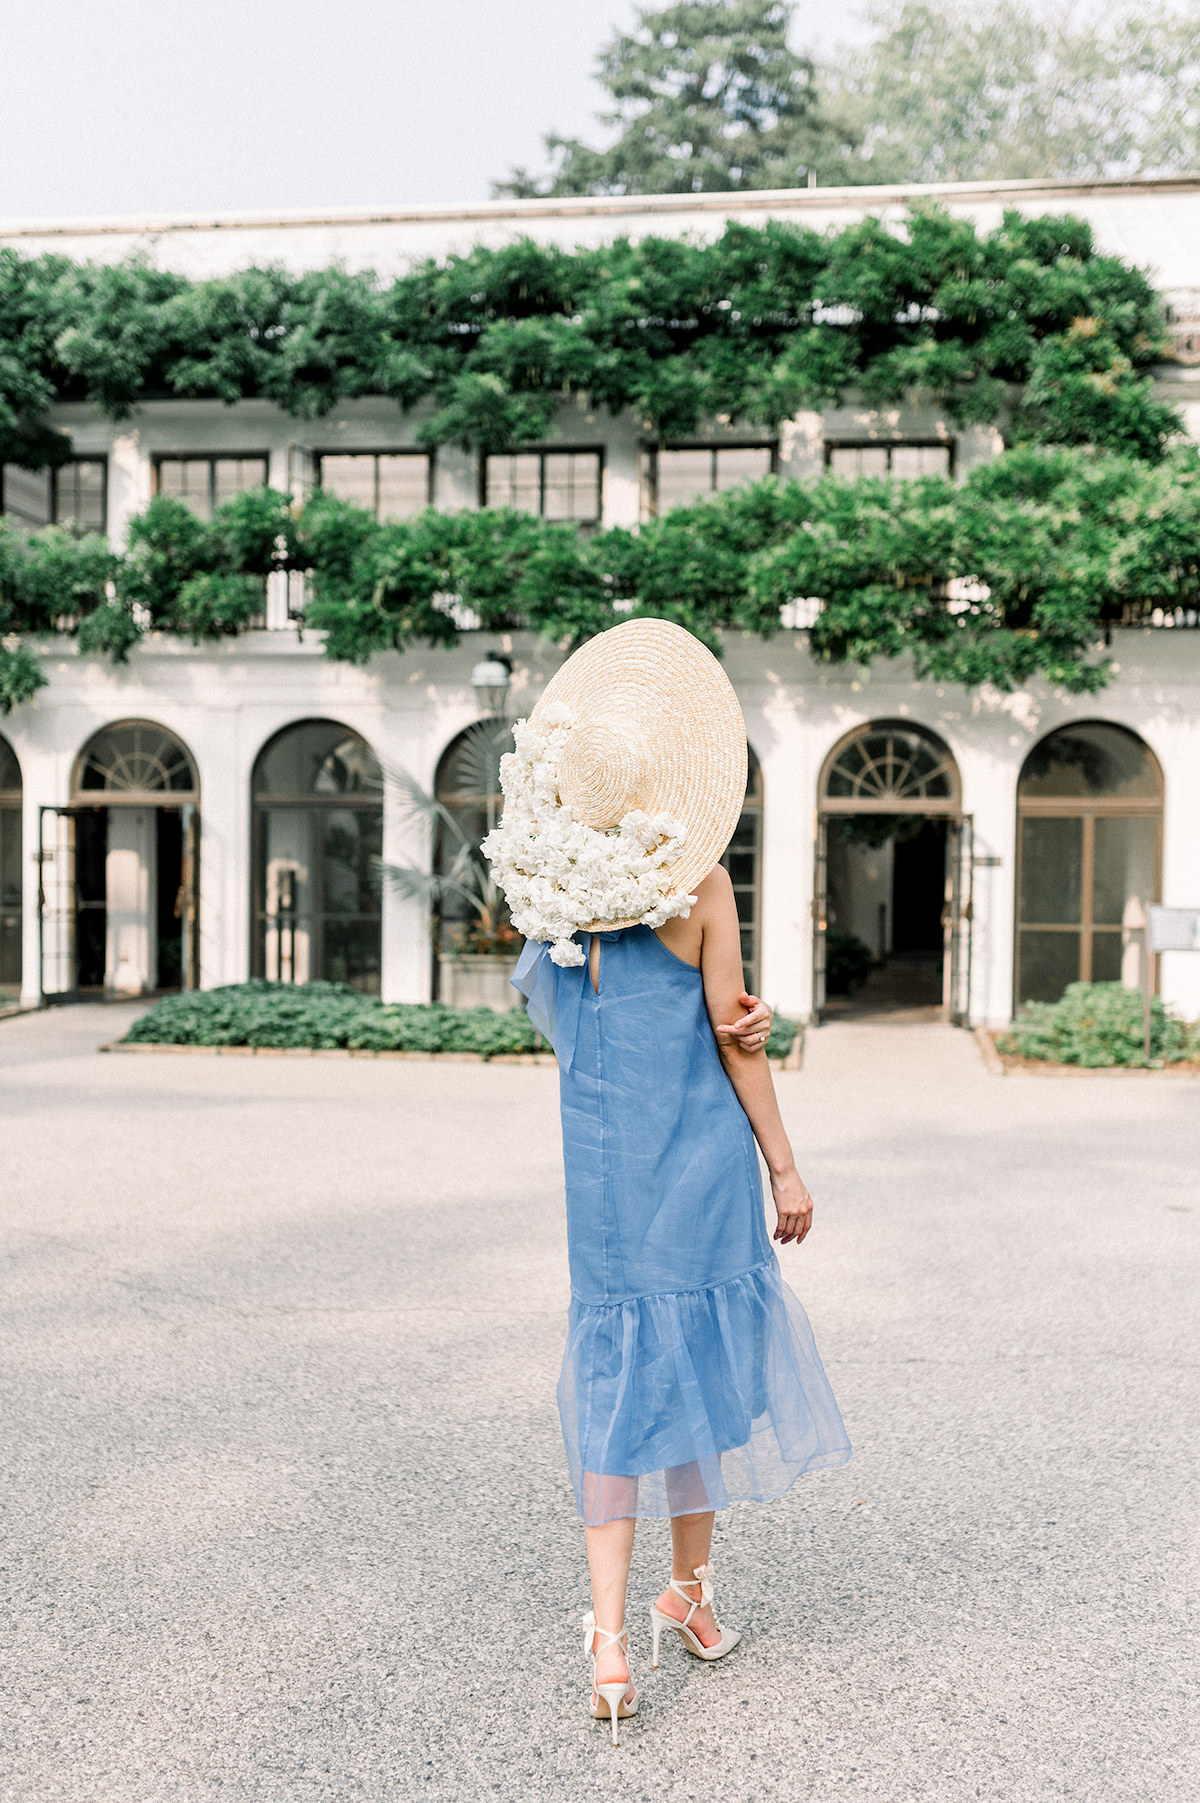 Karla's presence is a vision of sophistication against the backdrop of a historic house at Longwood Gardens, her Anthropologie French blue gown and elegant hat creating a harmonious blend of past and present.